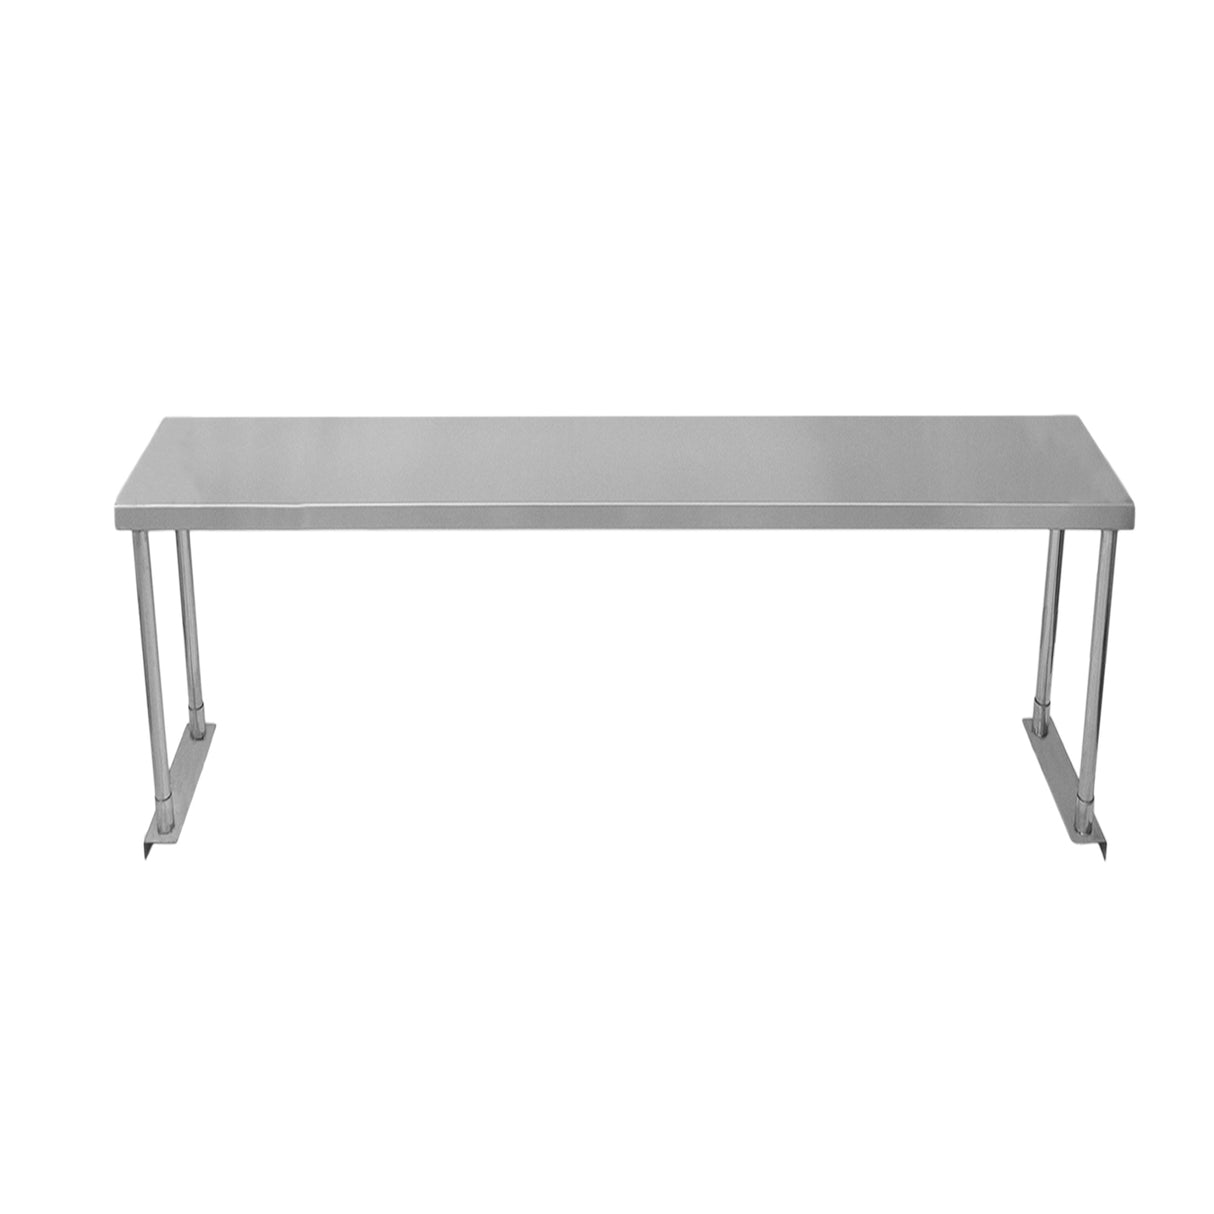 5ft Catering Bench With Single Over-Shelf